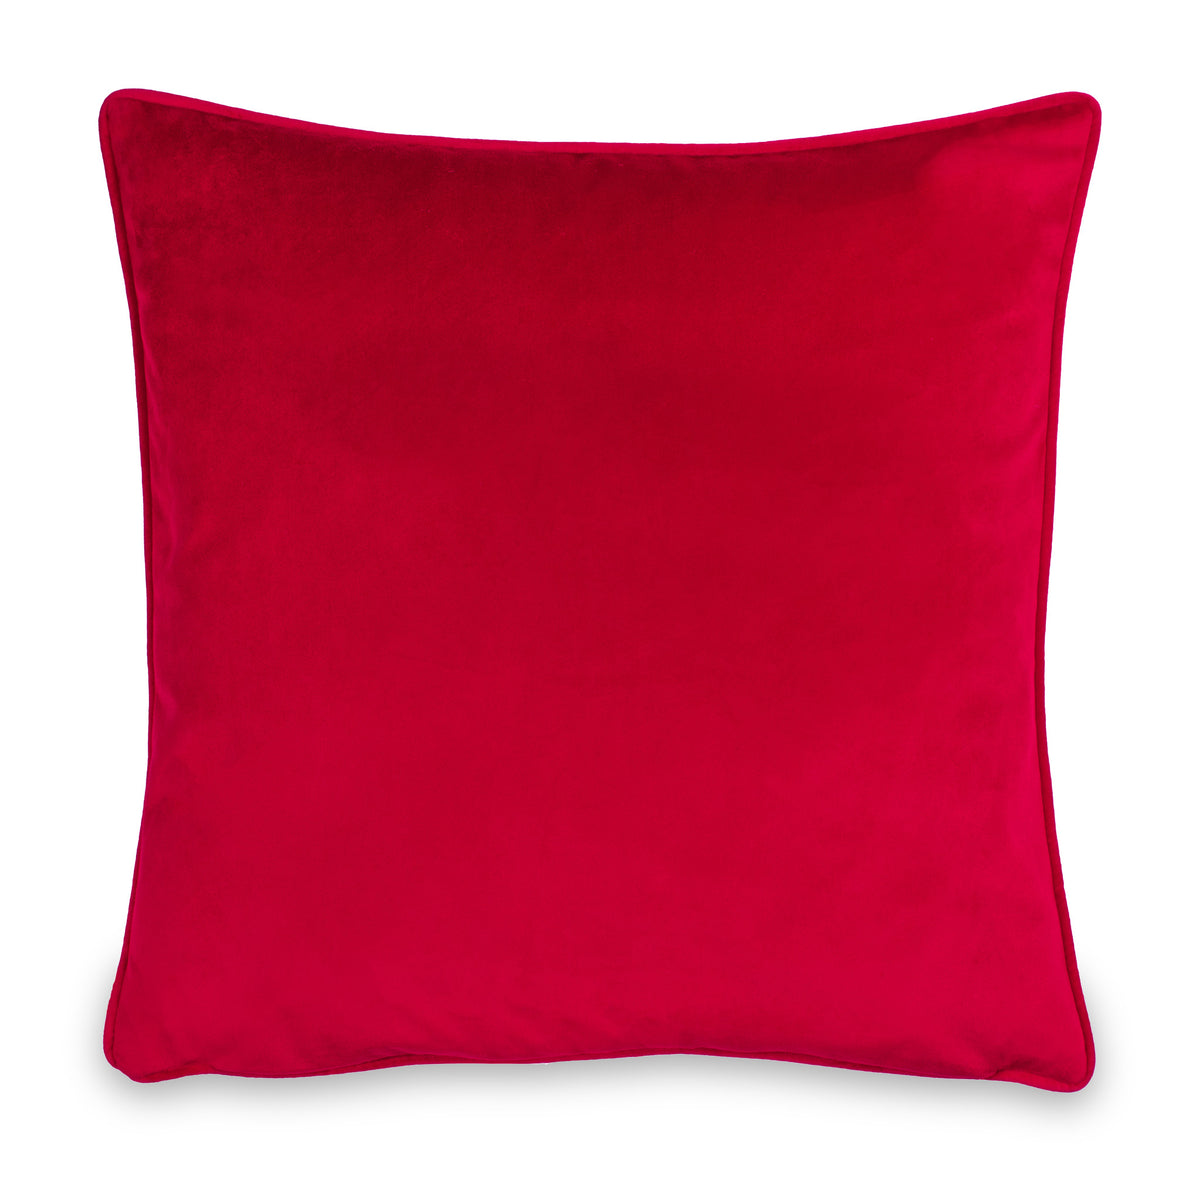 Purrfect Fabyuleous 43x43 Cushion by Roseland Furniture